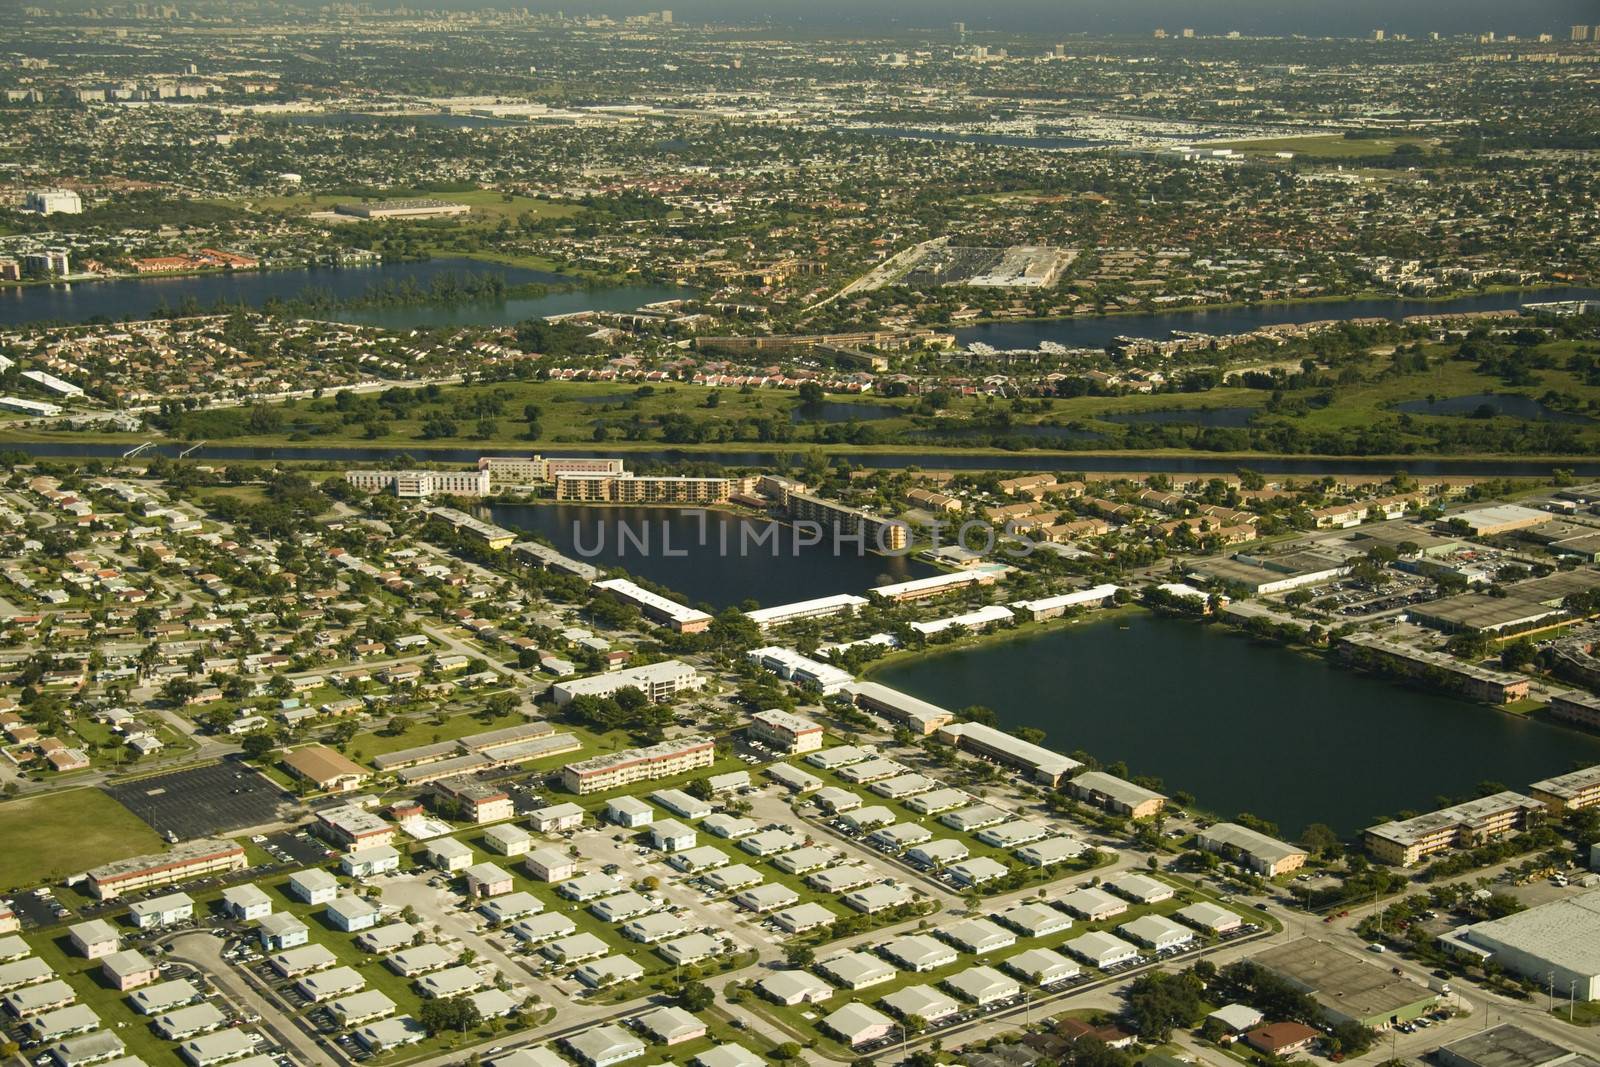 An aerial view of some commercial and industrial areas around the region of Miami.